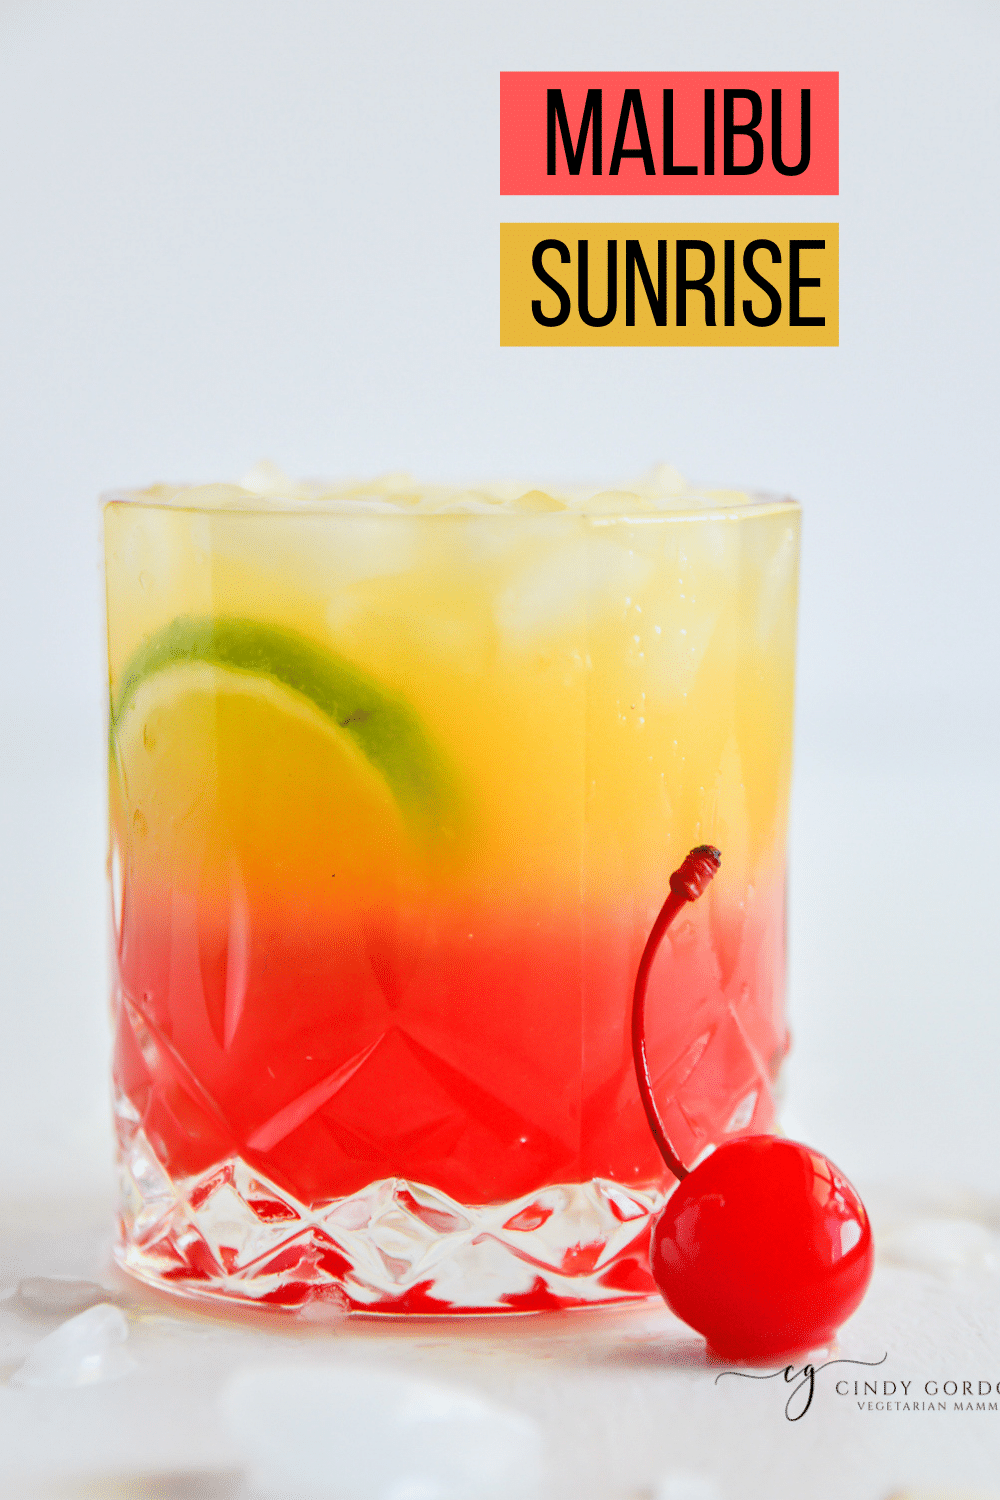 Malibu Sunrise is a fruity, refreshing cocktail that is easy to make and gorgeous to look at! It makes for the perfect drink any time of year.